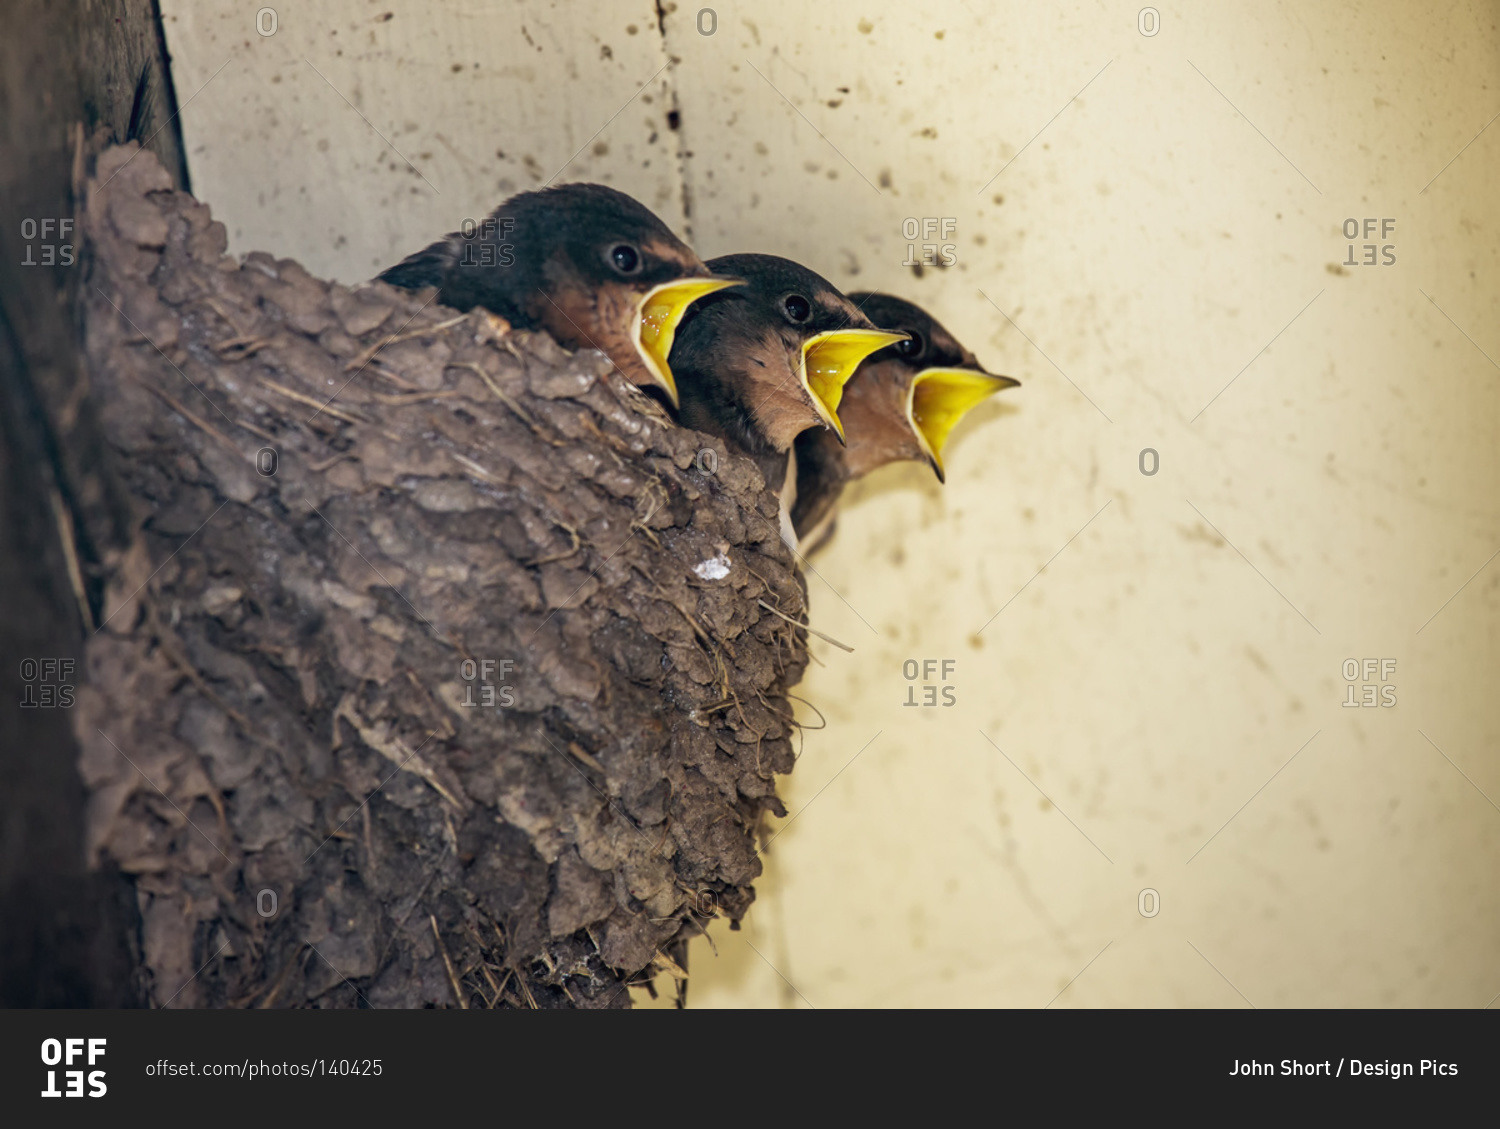 Three baby birds in a nest calling to their mother